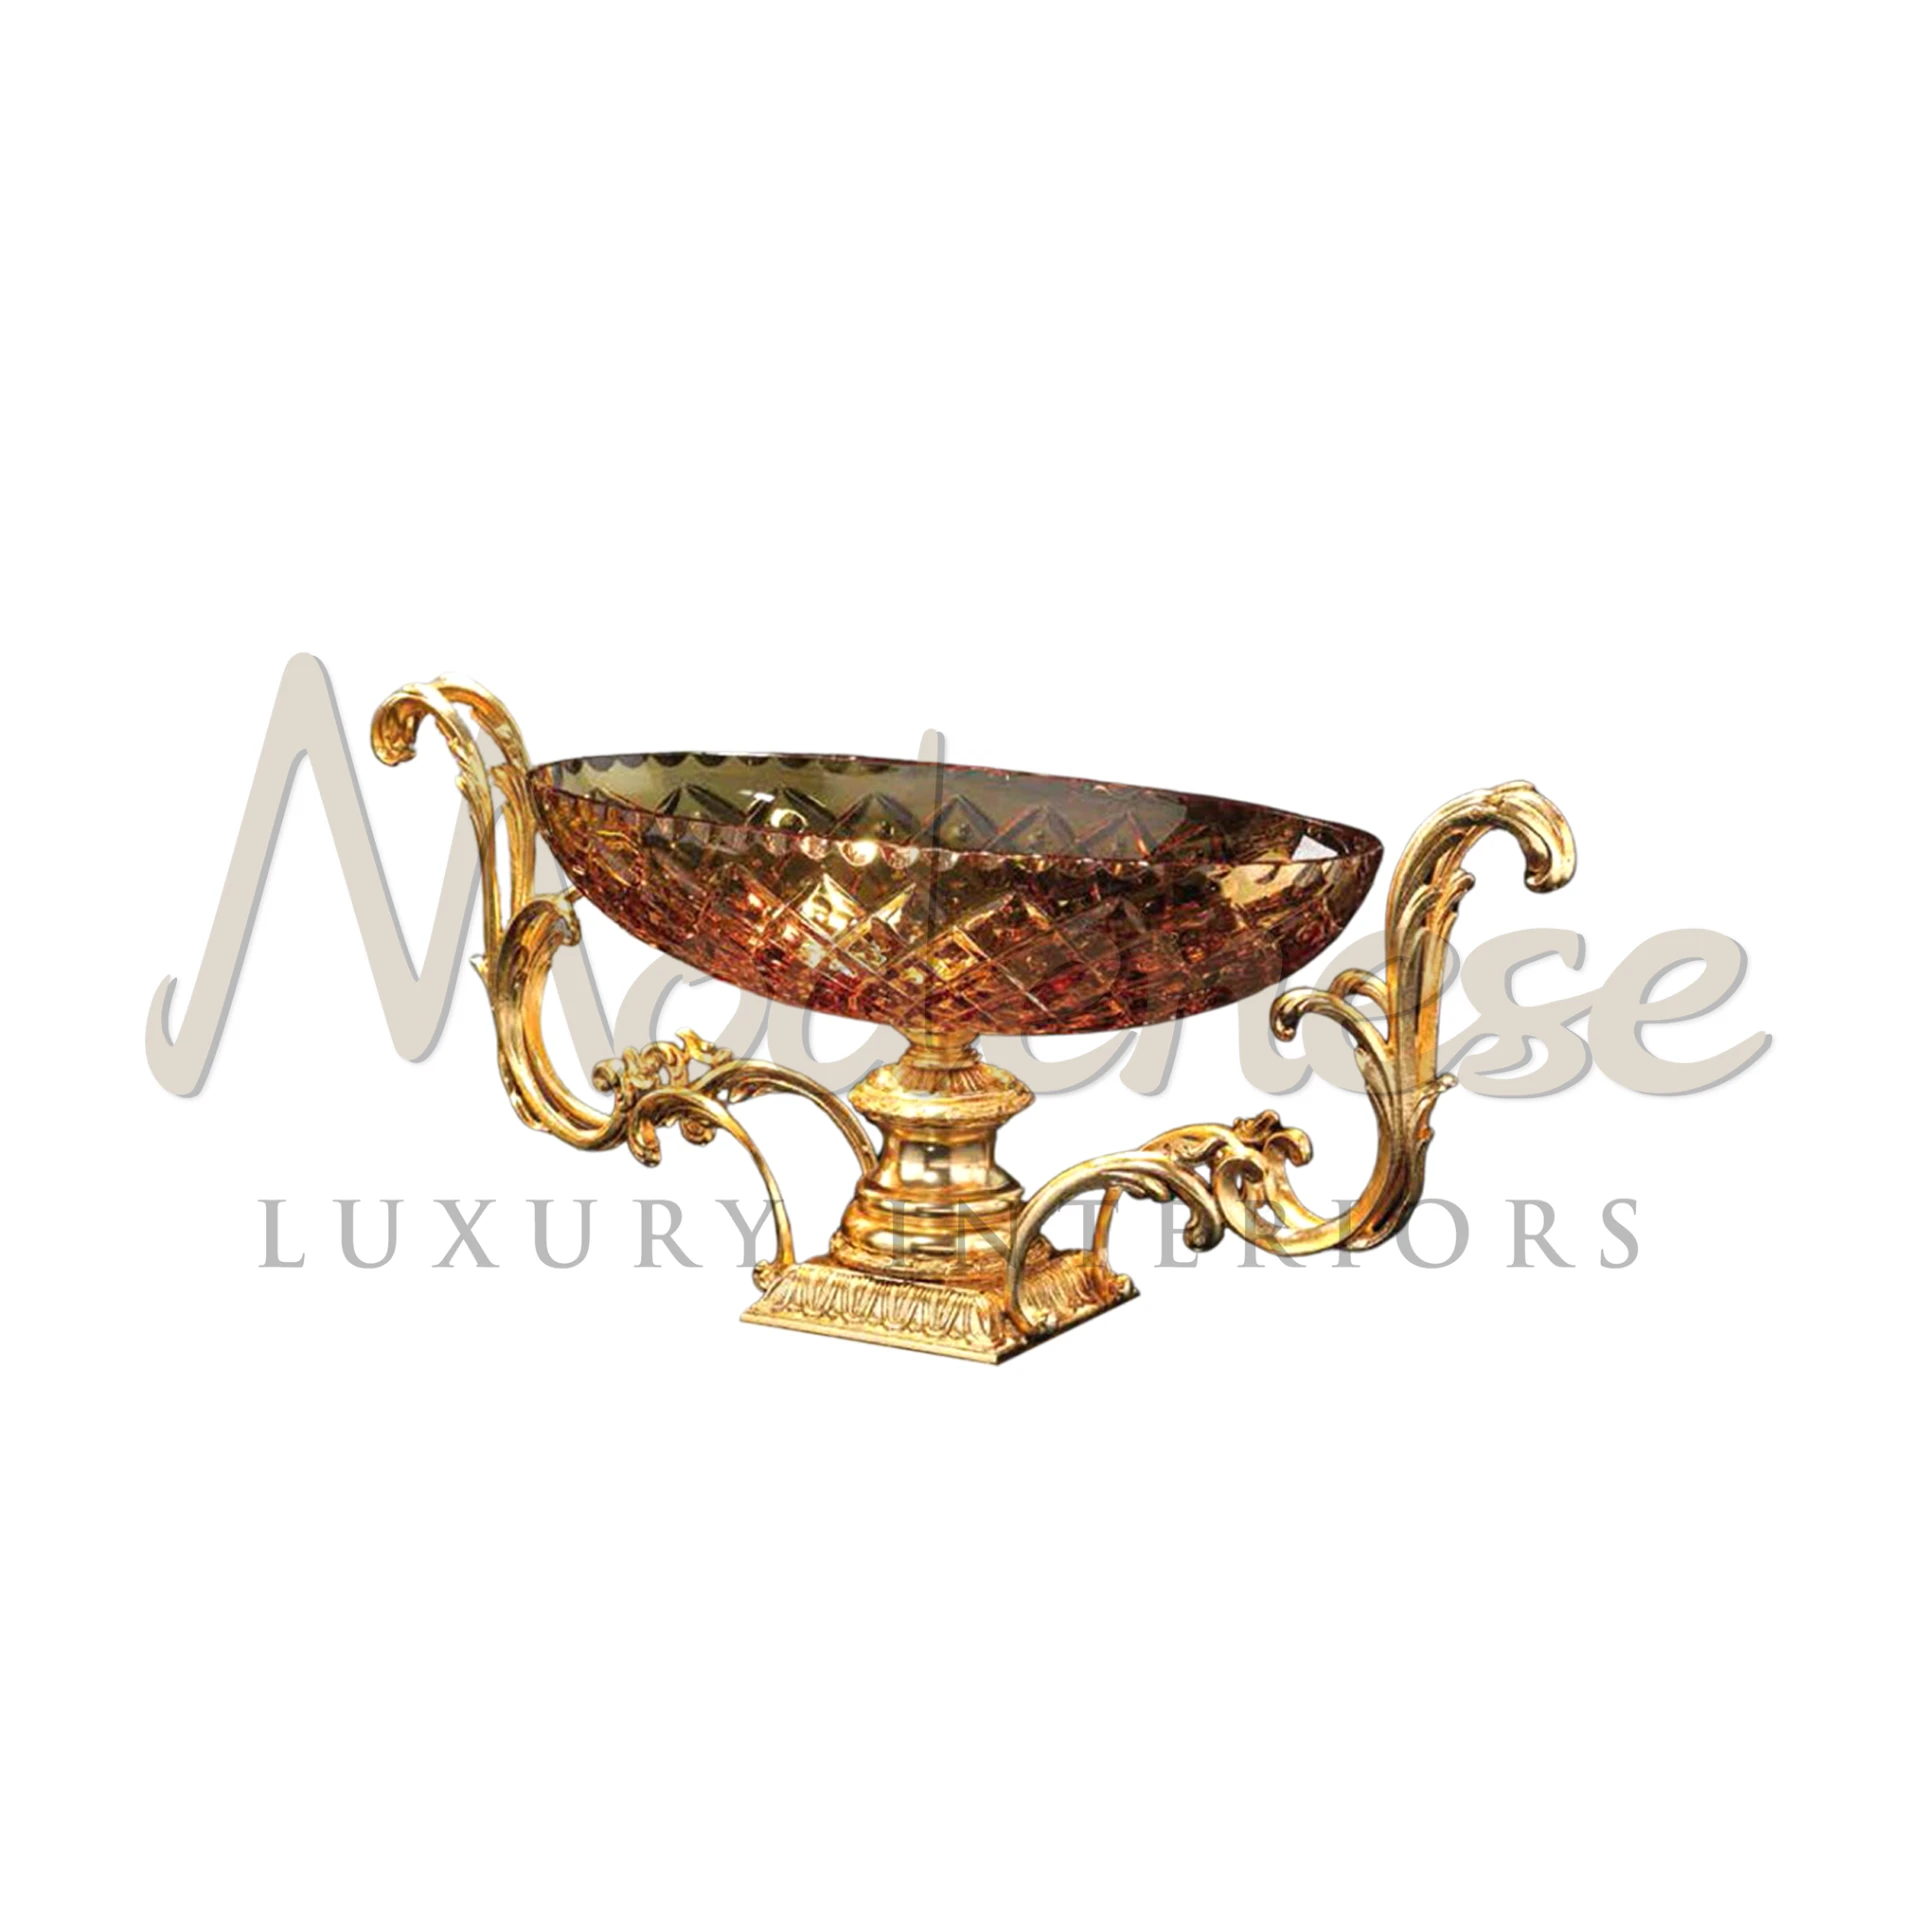 Elegant gold leaf vase with a sleek minimalist design, adding a luxurious touch to any interior setting.